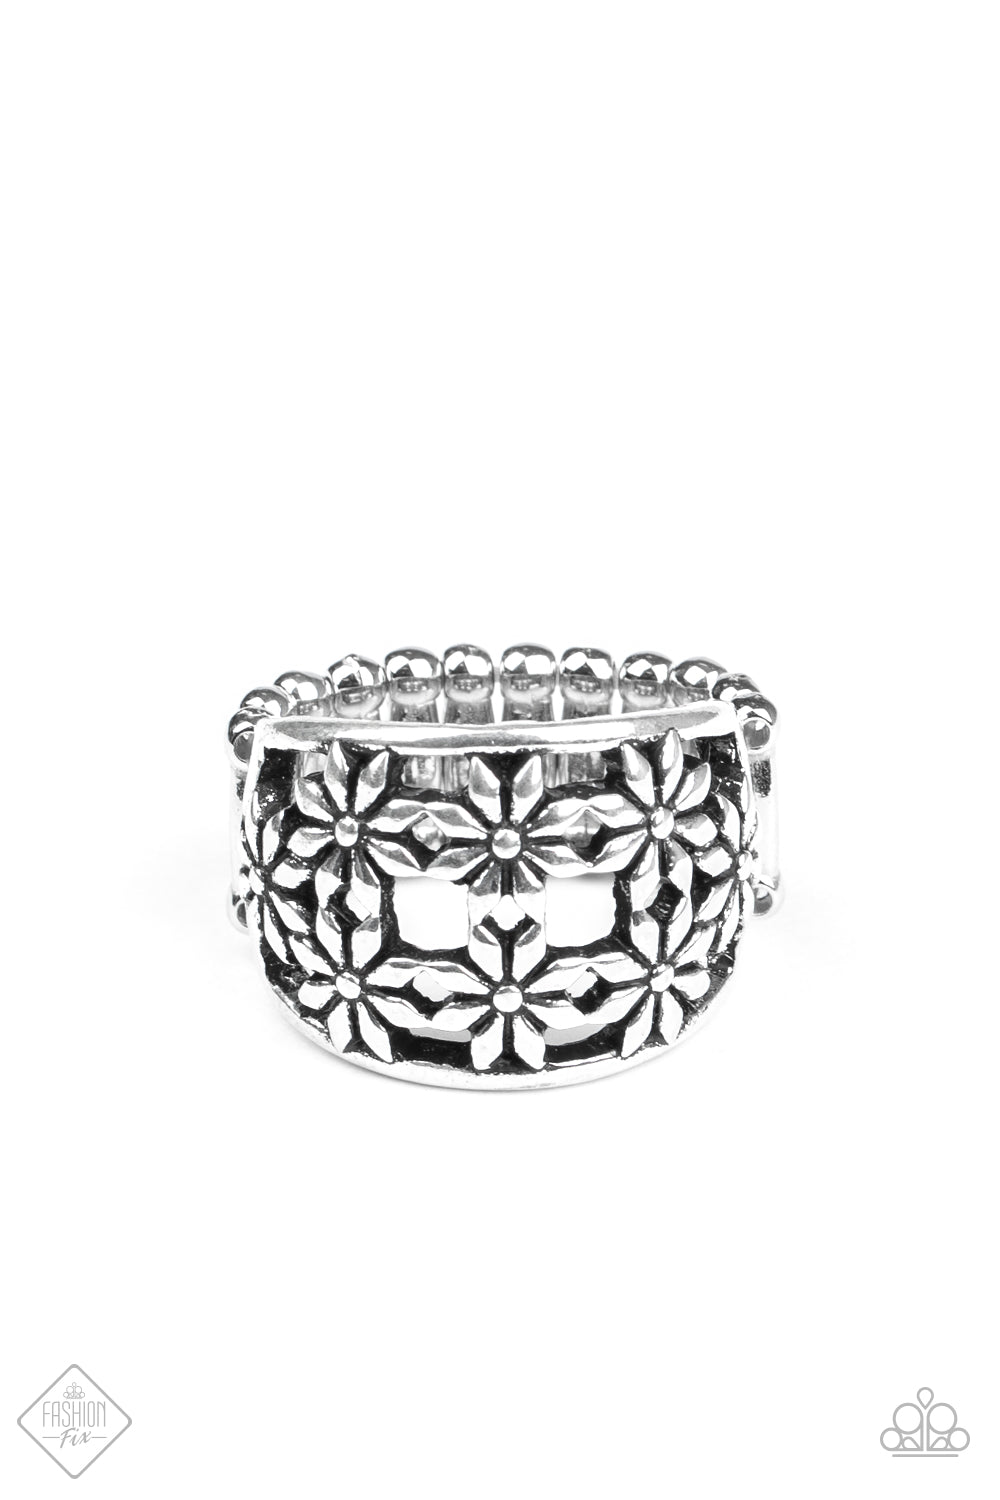 Paparazzi Fashion Fix Glimpses of Malibu August 2020 - Crazy About Daisies Silver Ring